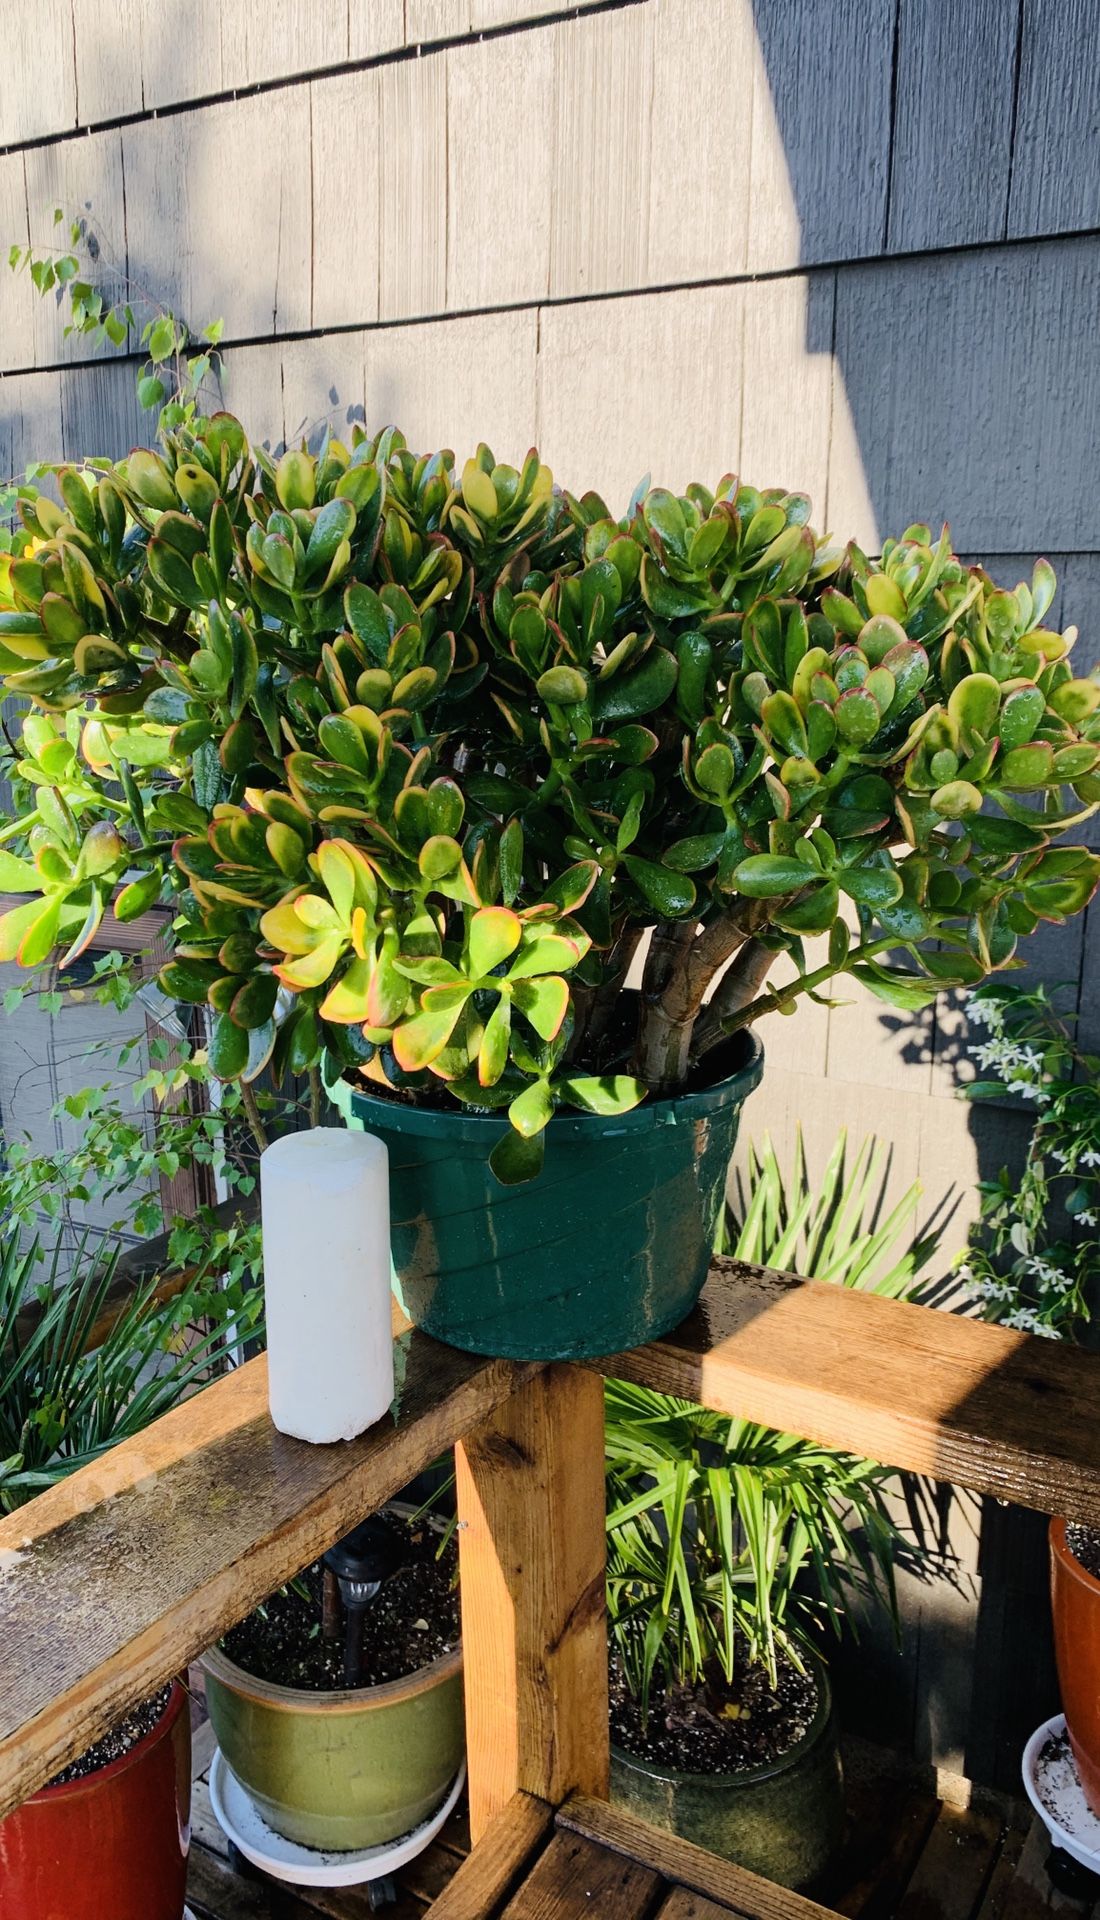 Live indoor large Jade tree plant in a plastic nursery planter pot—firm price